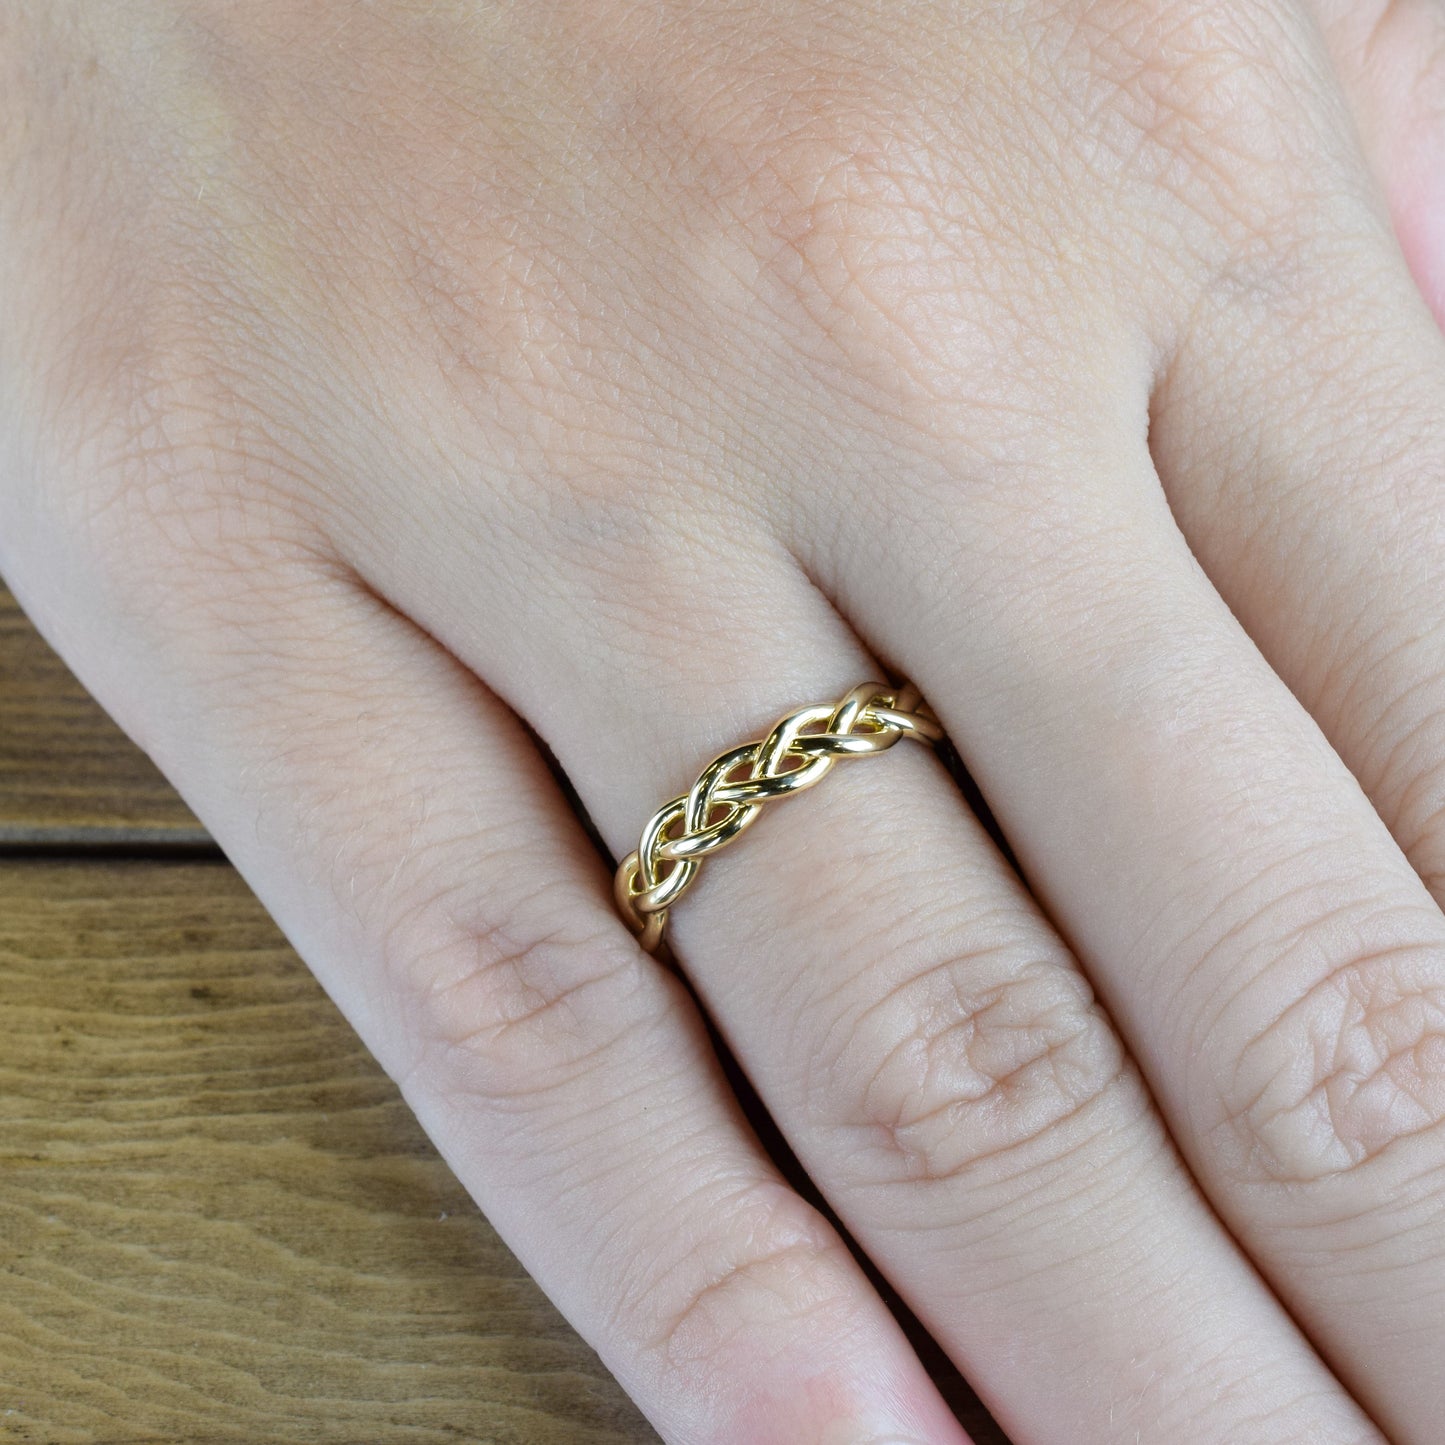 Braided yellow gold band on hand